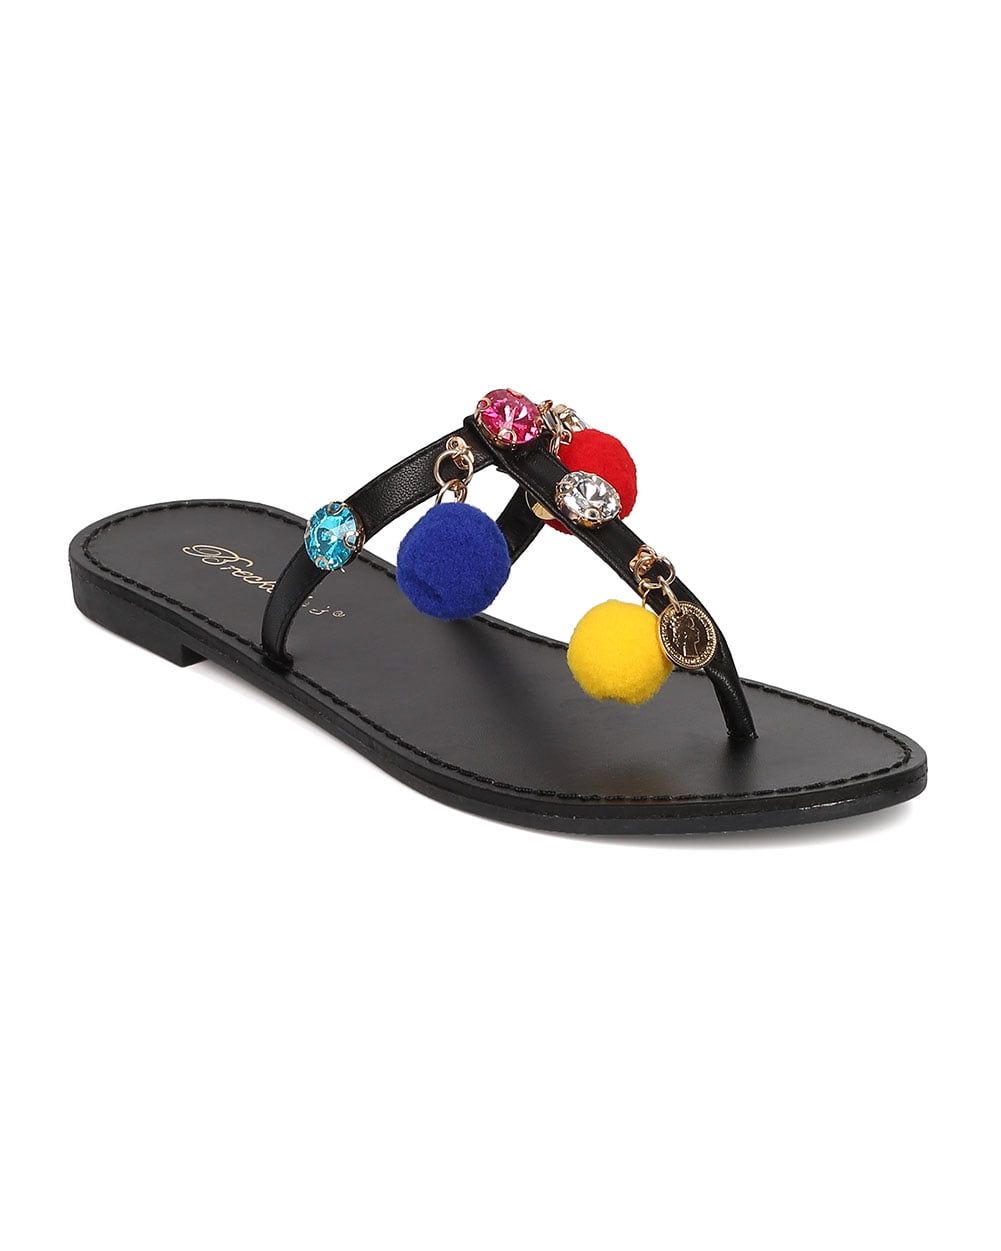 Women Leatherette T-Strap Dangling Charms and Pom Pom Sandal HA18